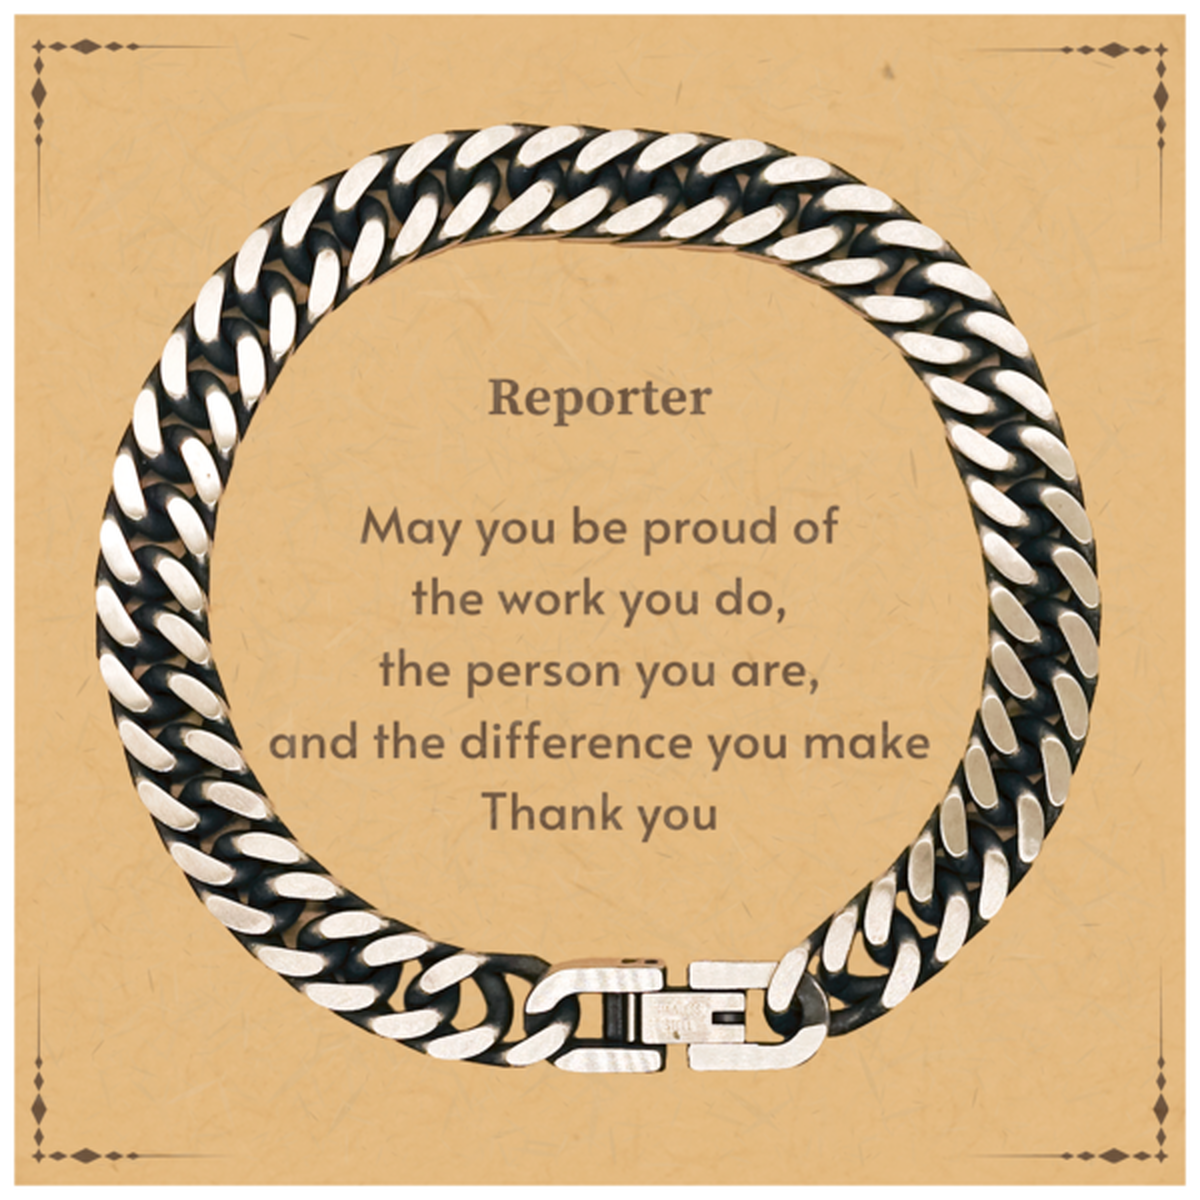 Heartwarming Cuban Link Chain Bracelet Retirement Coworkers Gifts for Reporter, Reporter May You be proud of the work you do, the person you are Gifts for Boss Men Women Friends